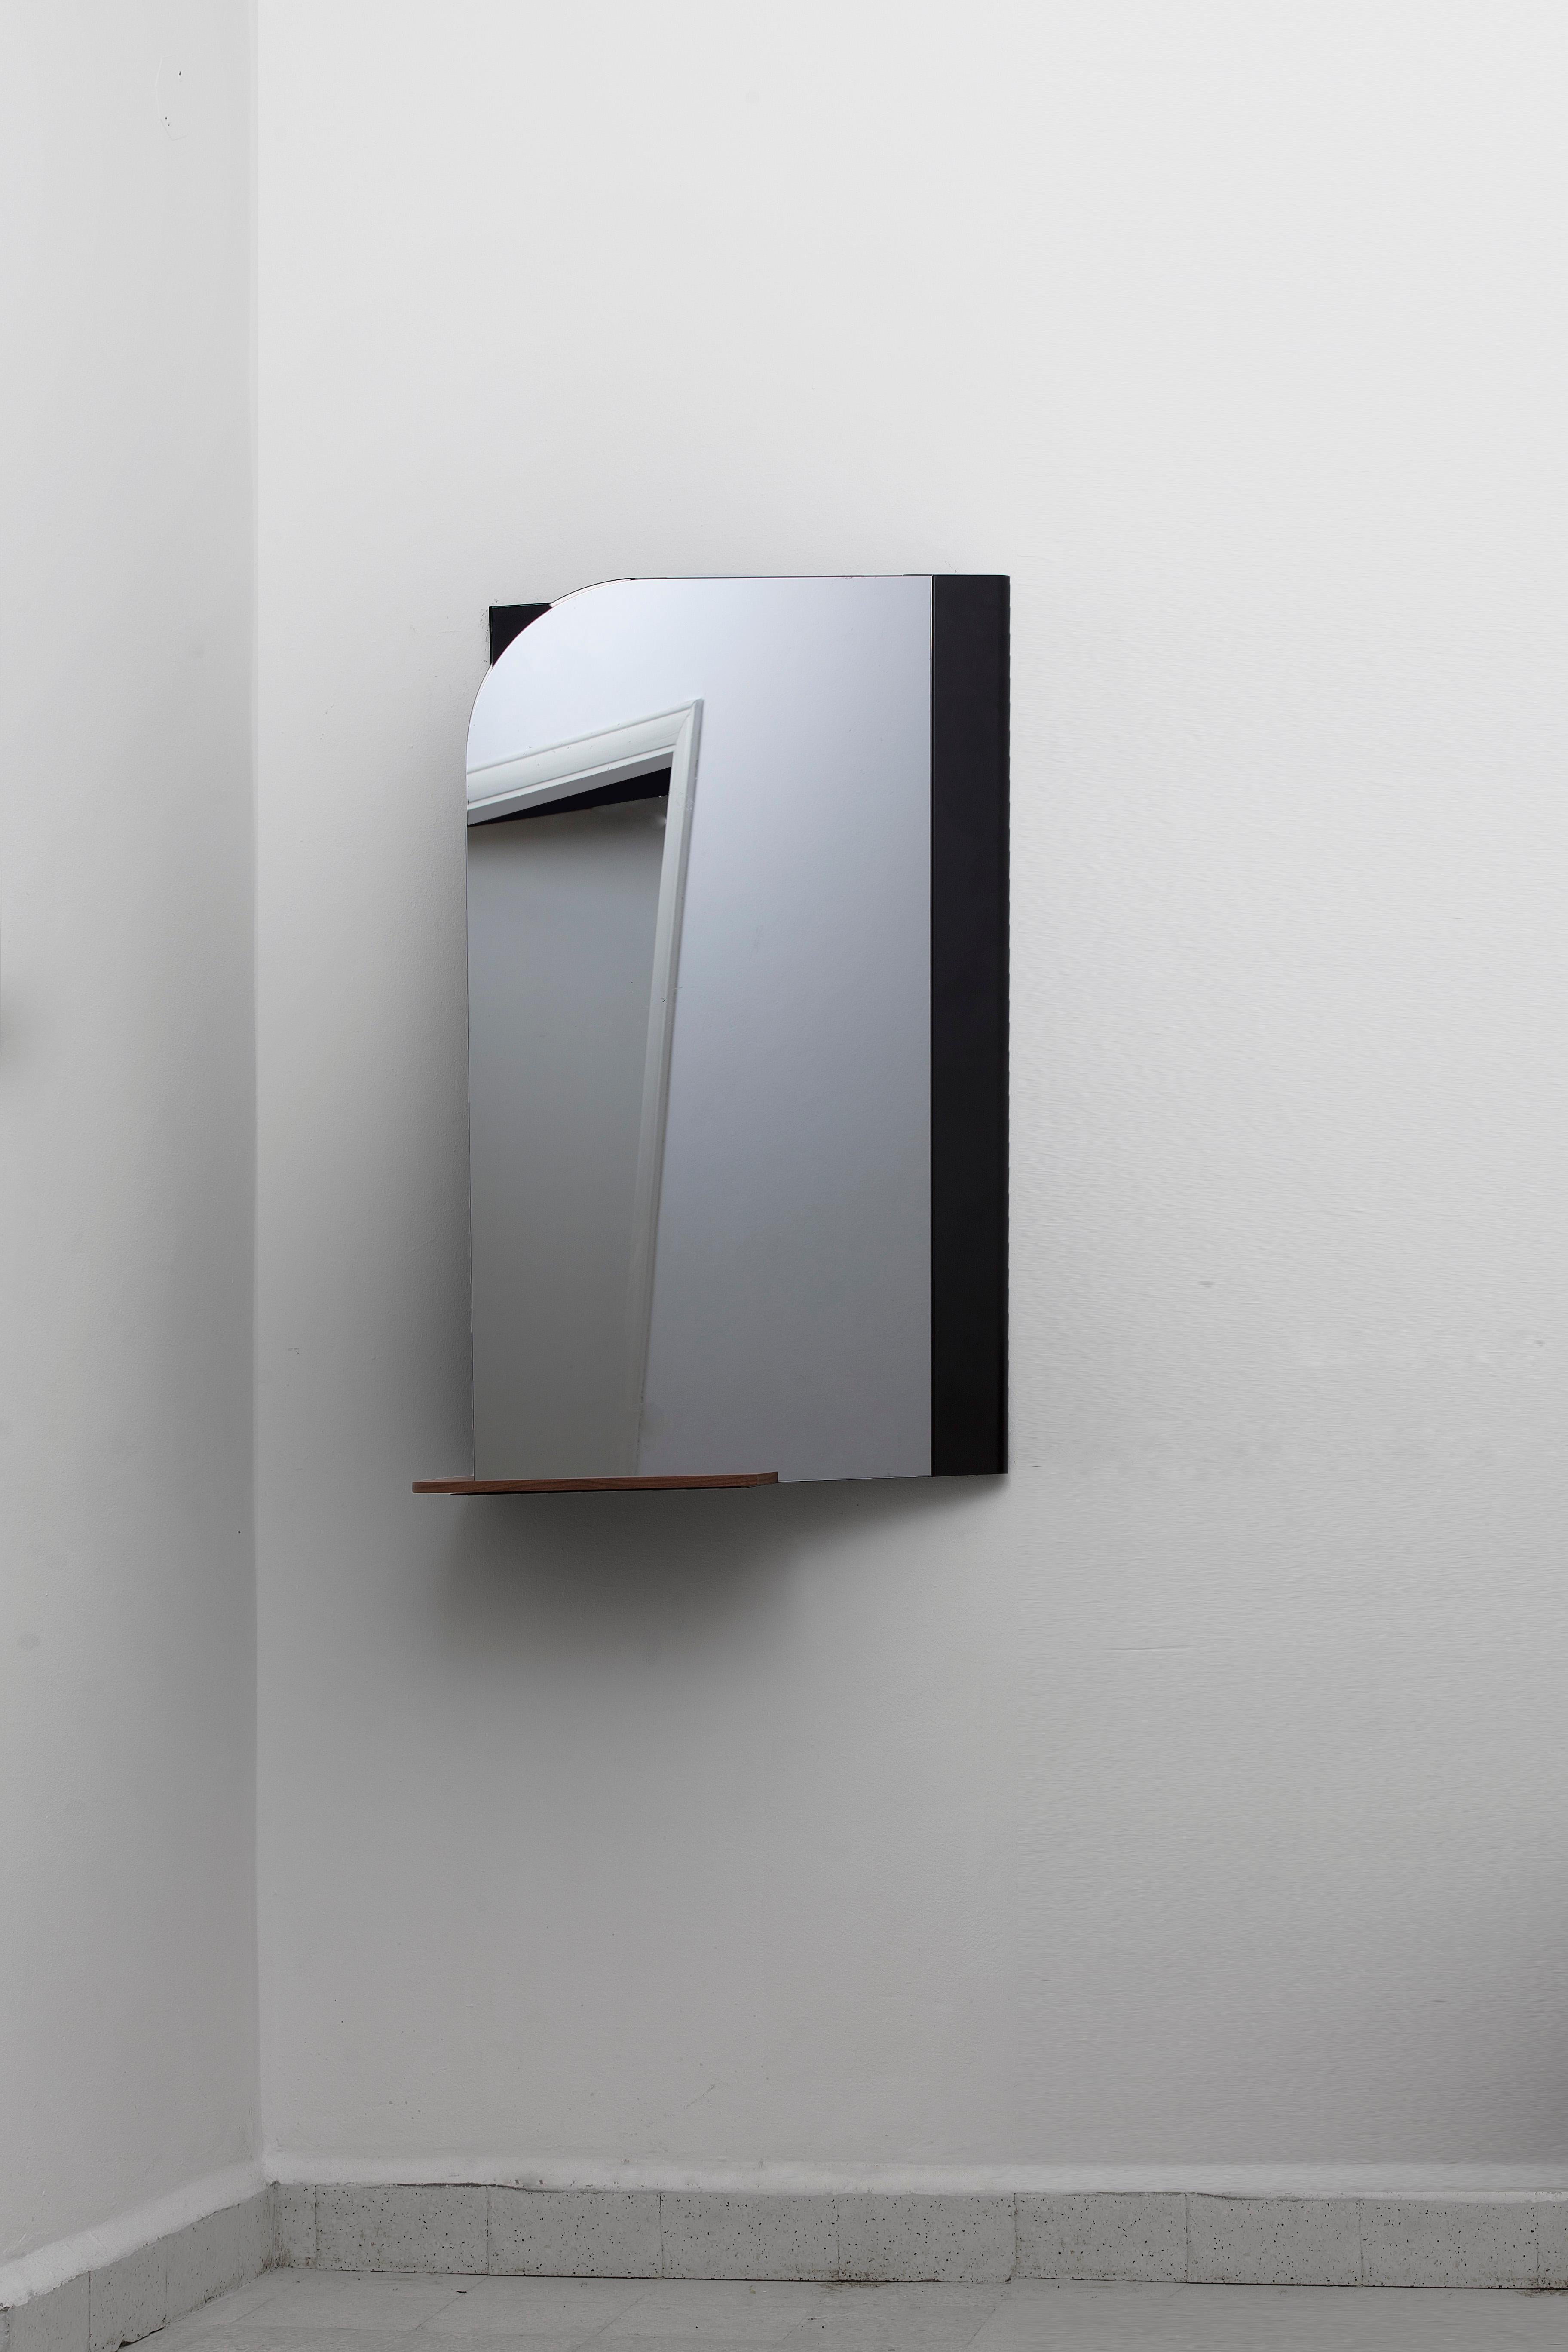 Pivot medium mirror by Borgi Bastormagi
Dimensions: 25 x 60 x 100 cm
Material: steel, mirror, walnut wood

Pivot -M- is a variation of the full height mirror, designed to revisit the conventional console.

Wall mounted, Pivot -M- is ideal for